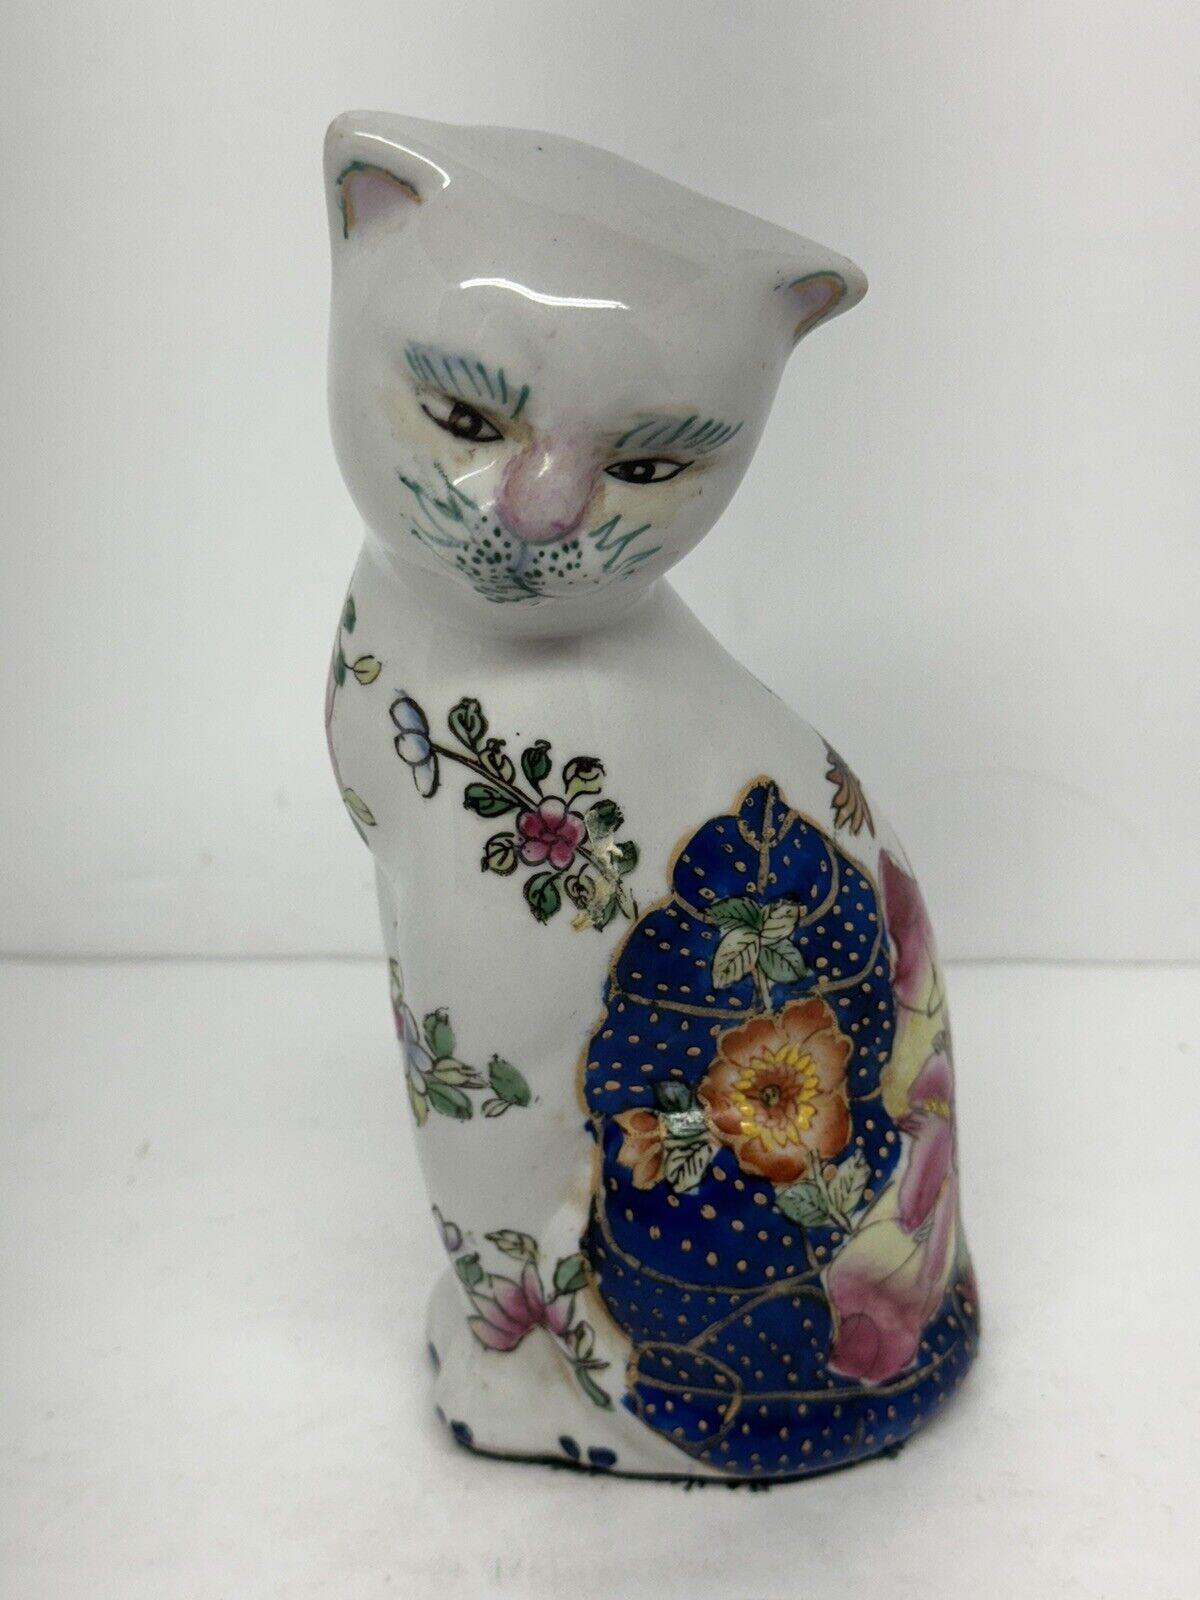 Vintage Chinese Tobacco Leaf China Cat Figurine, Chinoiserie Porcelain